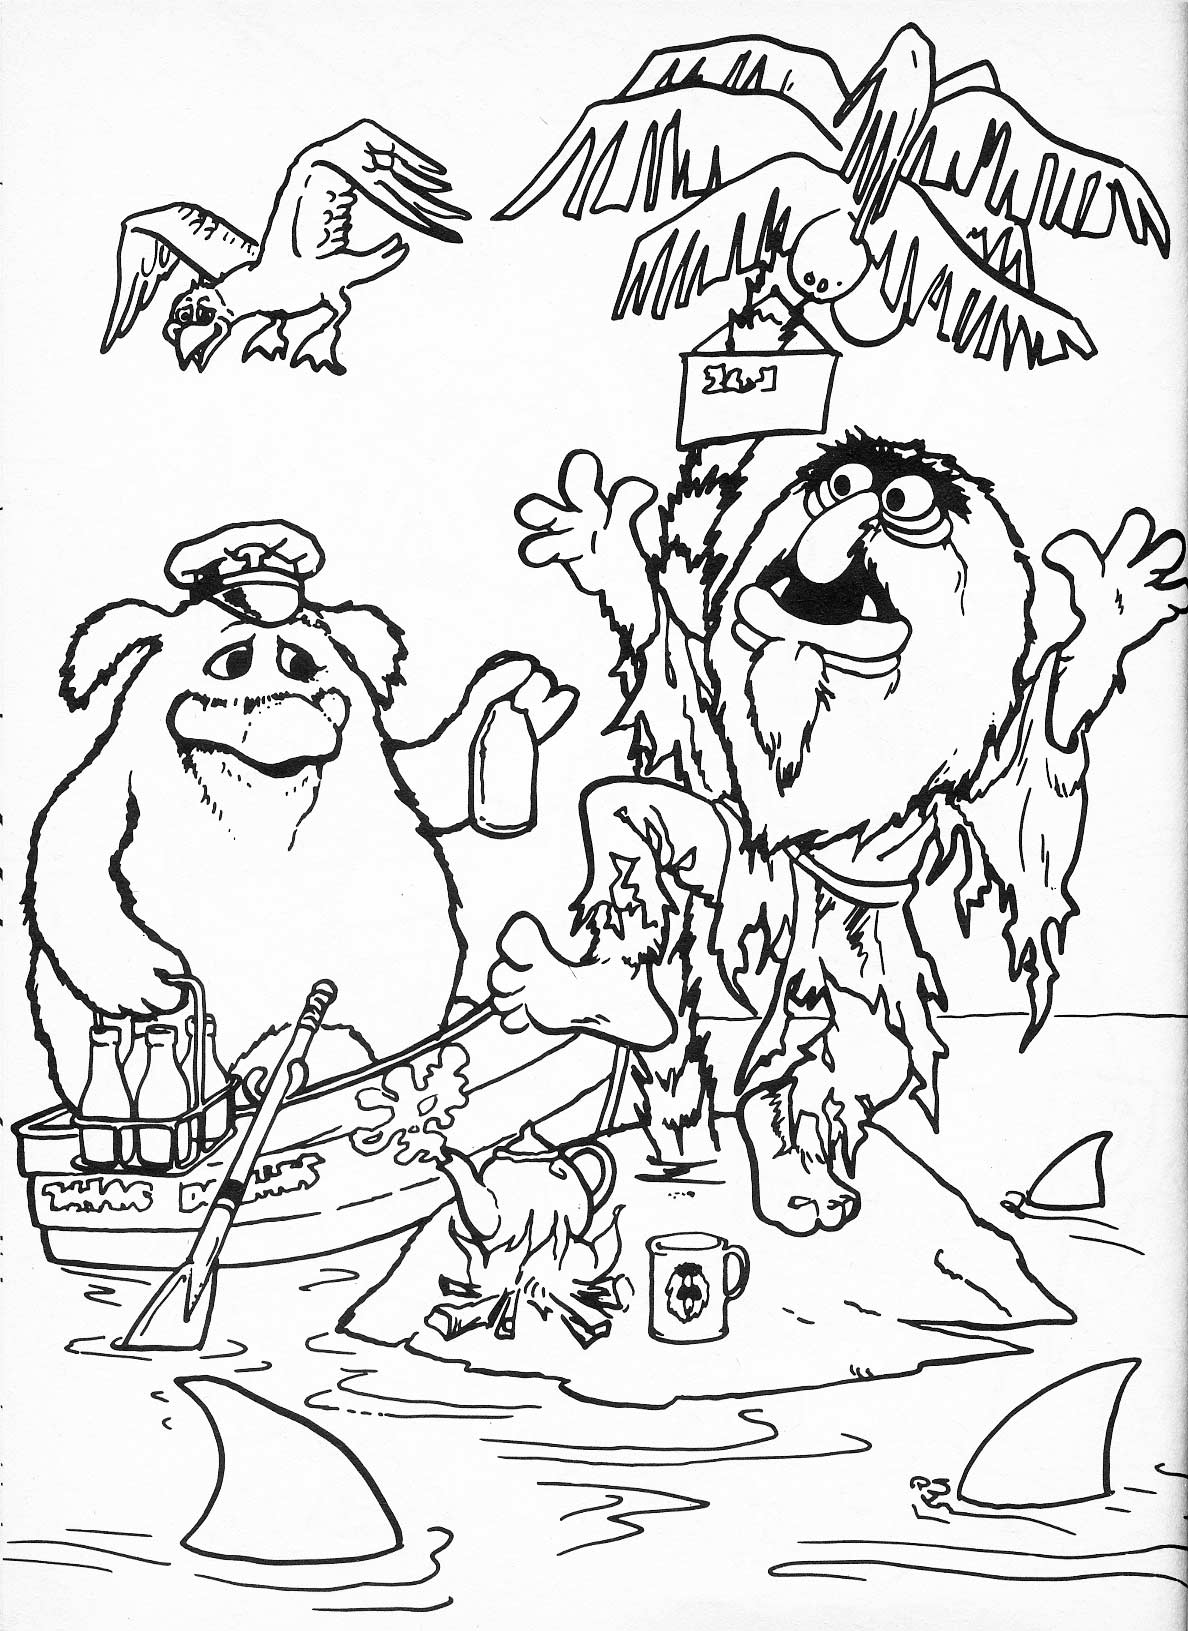 Muppets Animal Drawing at GetDrawings.com | Free for personal use